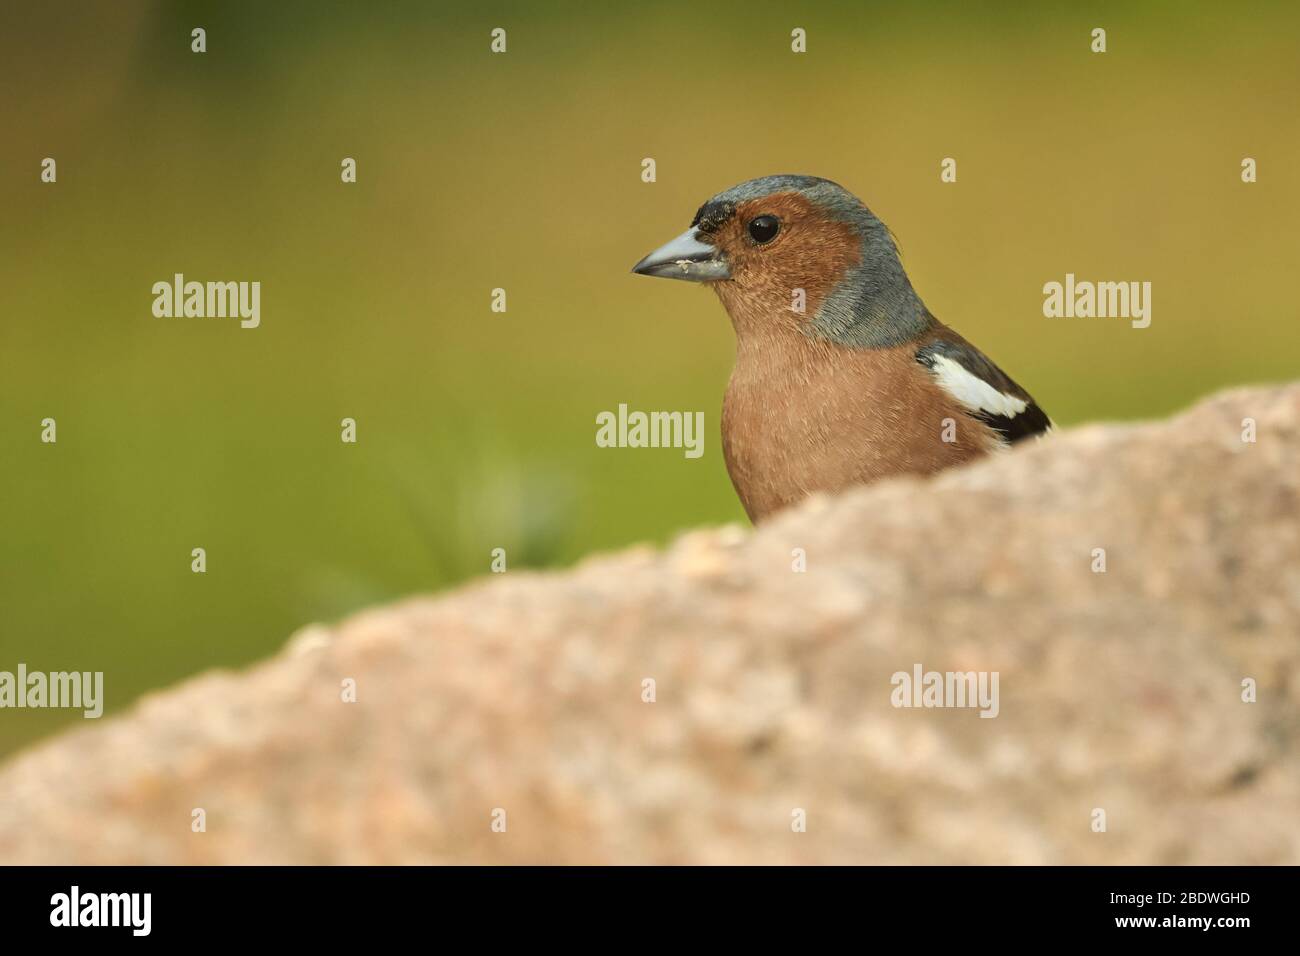 Small chaffinch bird (Fringilla coelebs) hides behind a rock in nature. Wild passerine bird in the finch family with green vibrant background in Germa Stock Photo